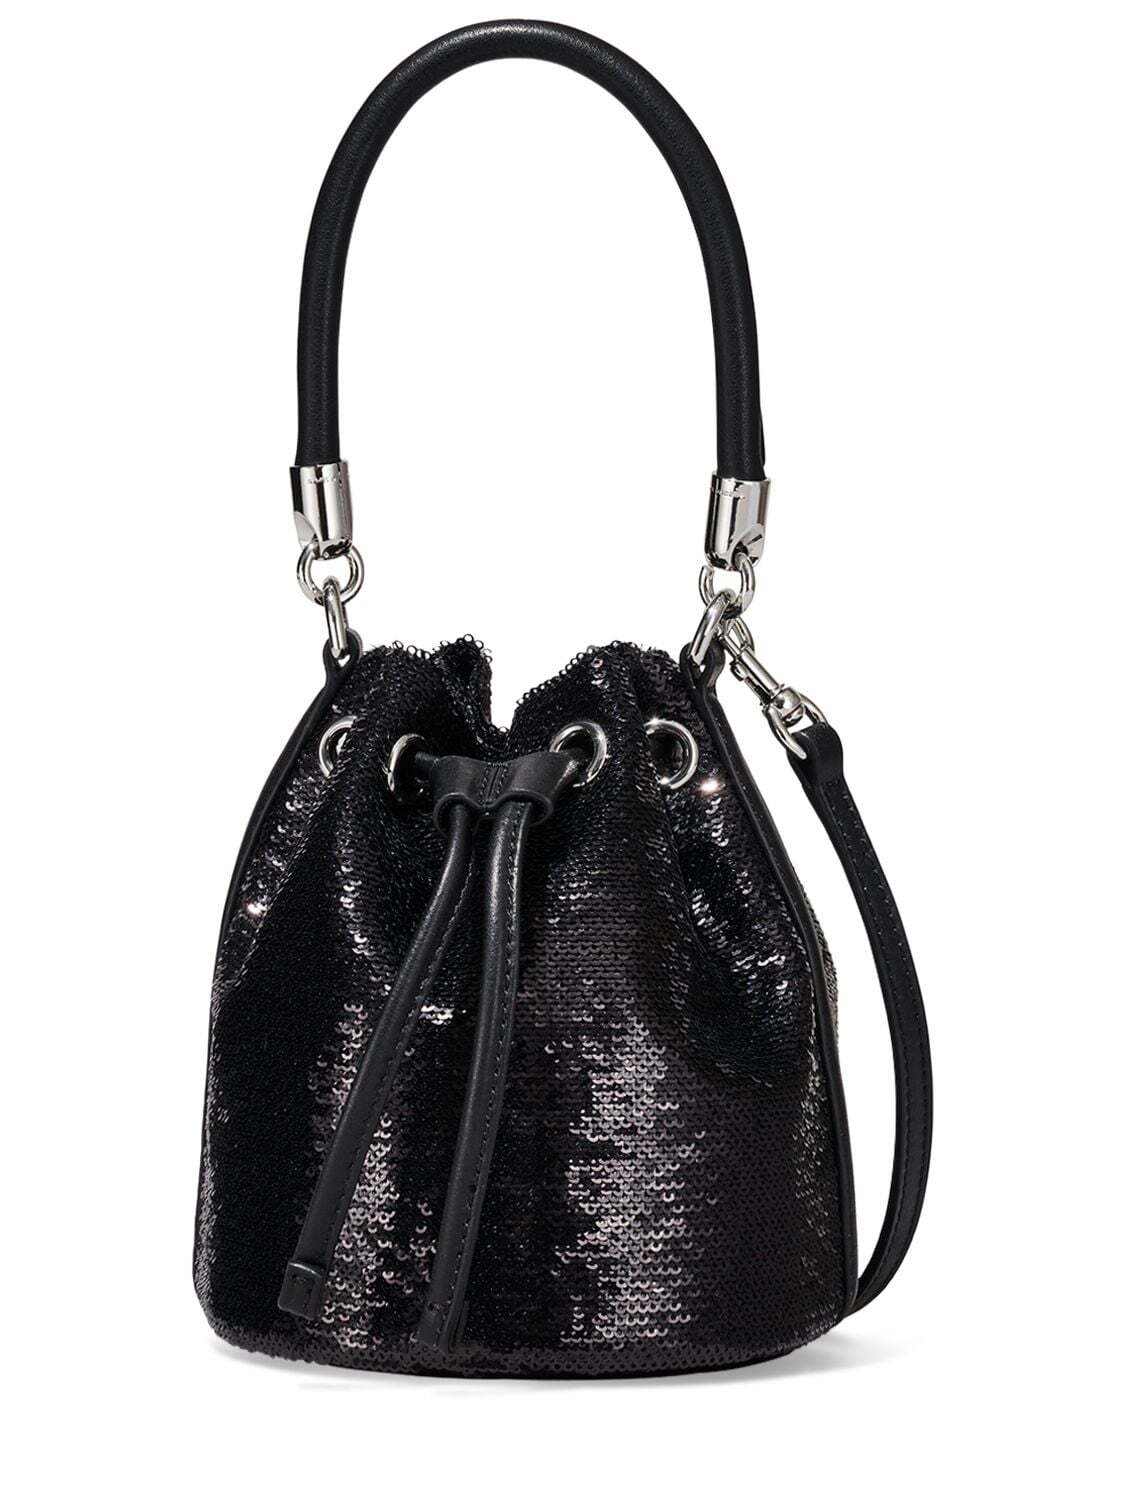 MARC JACOBS (THE) The Micro Bucket Bag in black